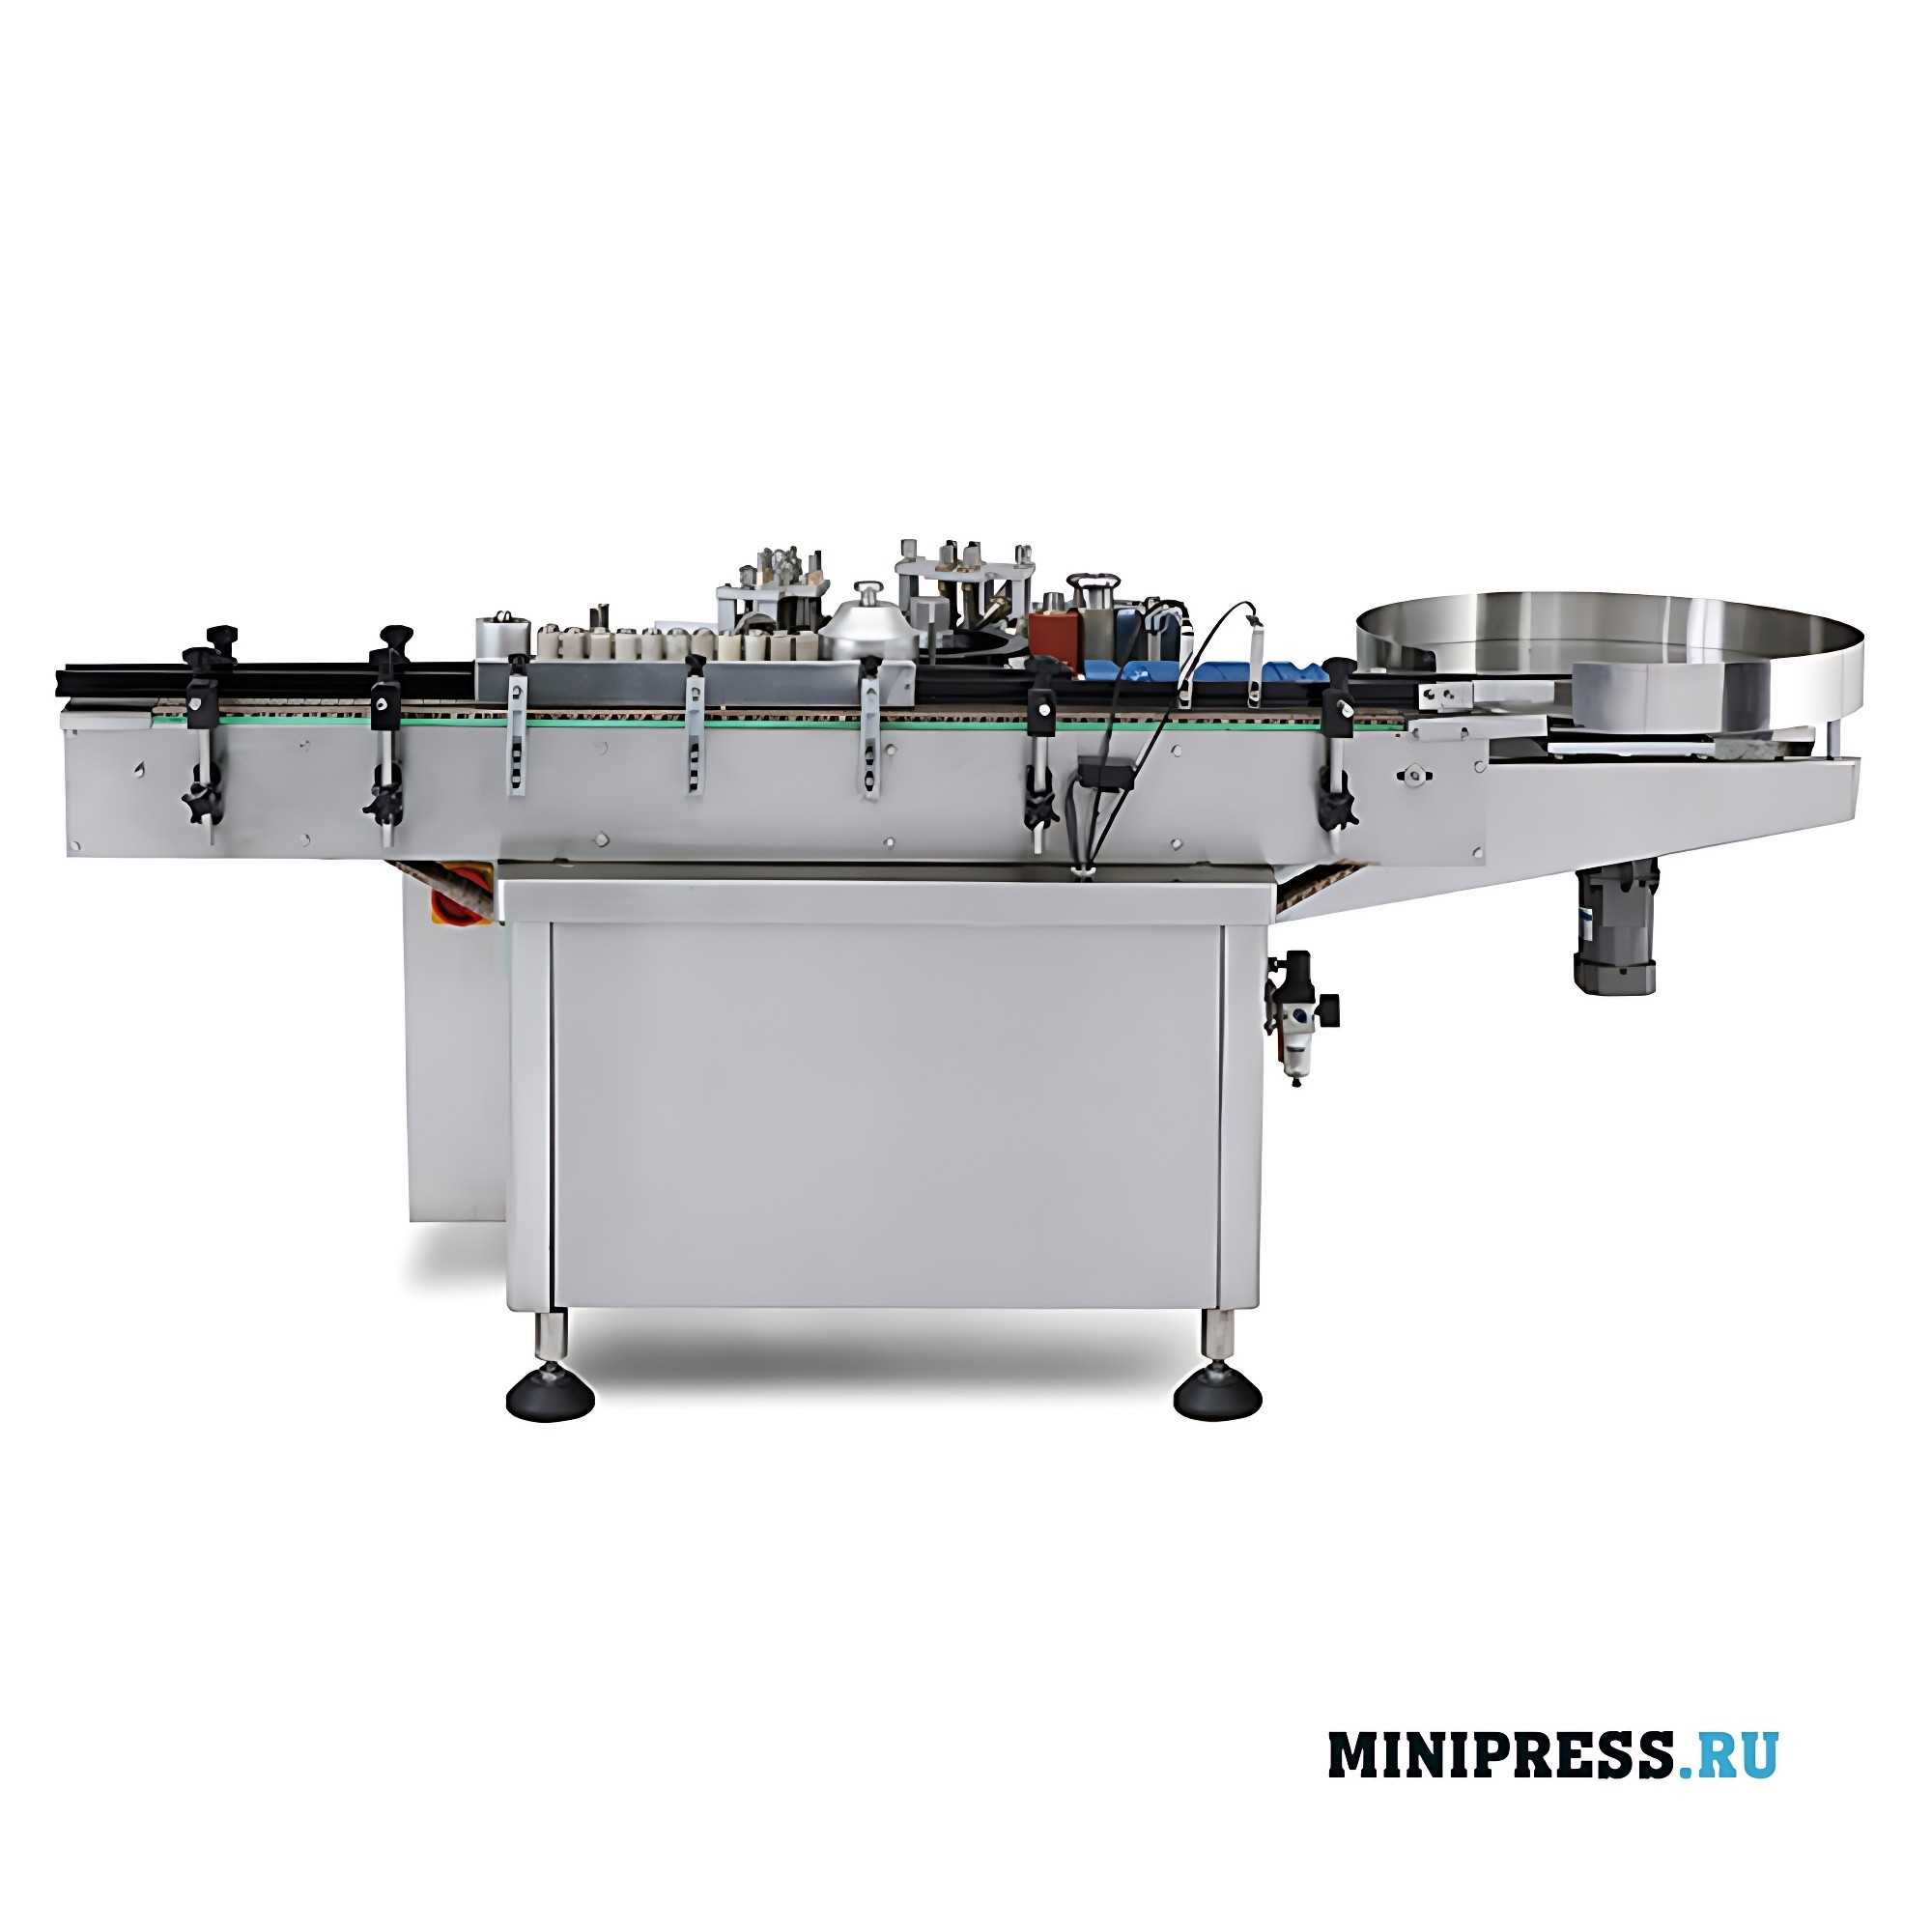 Automatic labeling equipment for adhesive-based labels SYM 3